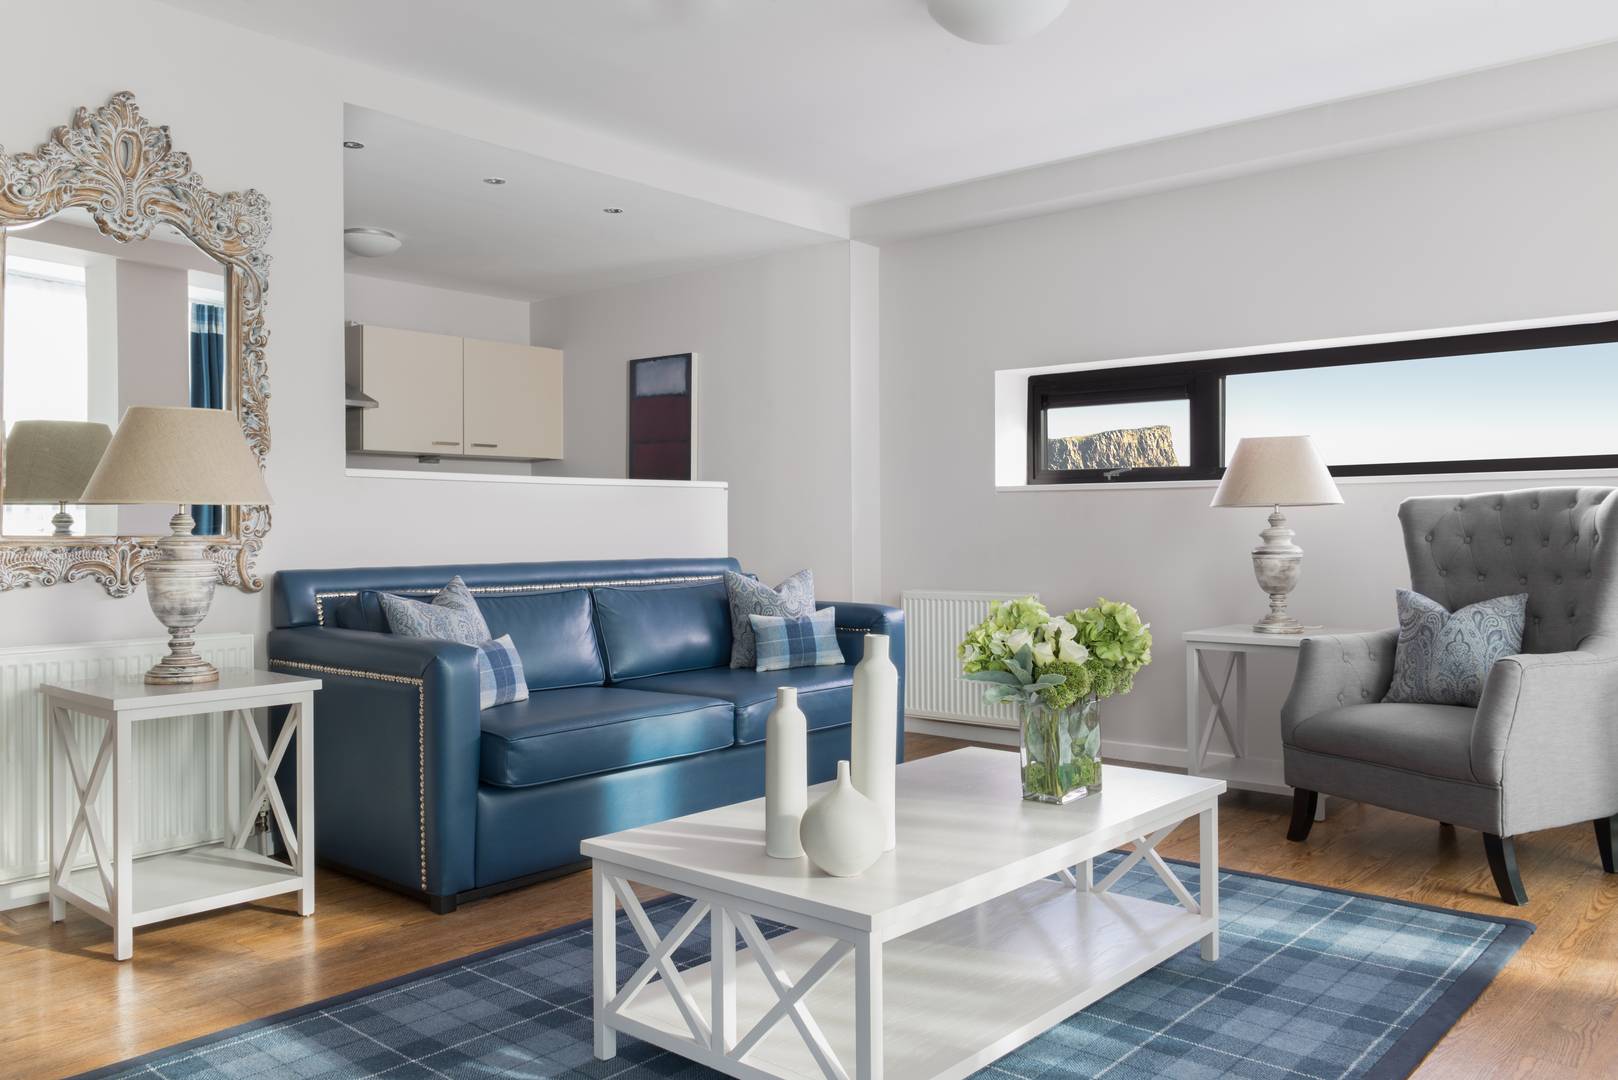 Princes Street Suites - Stylish Living in the heart of Edinburgh, Princes Street Suites - The Edinburgh Collection